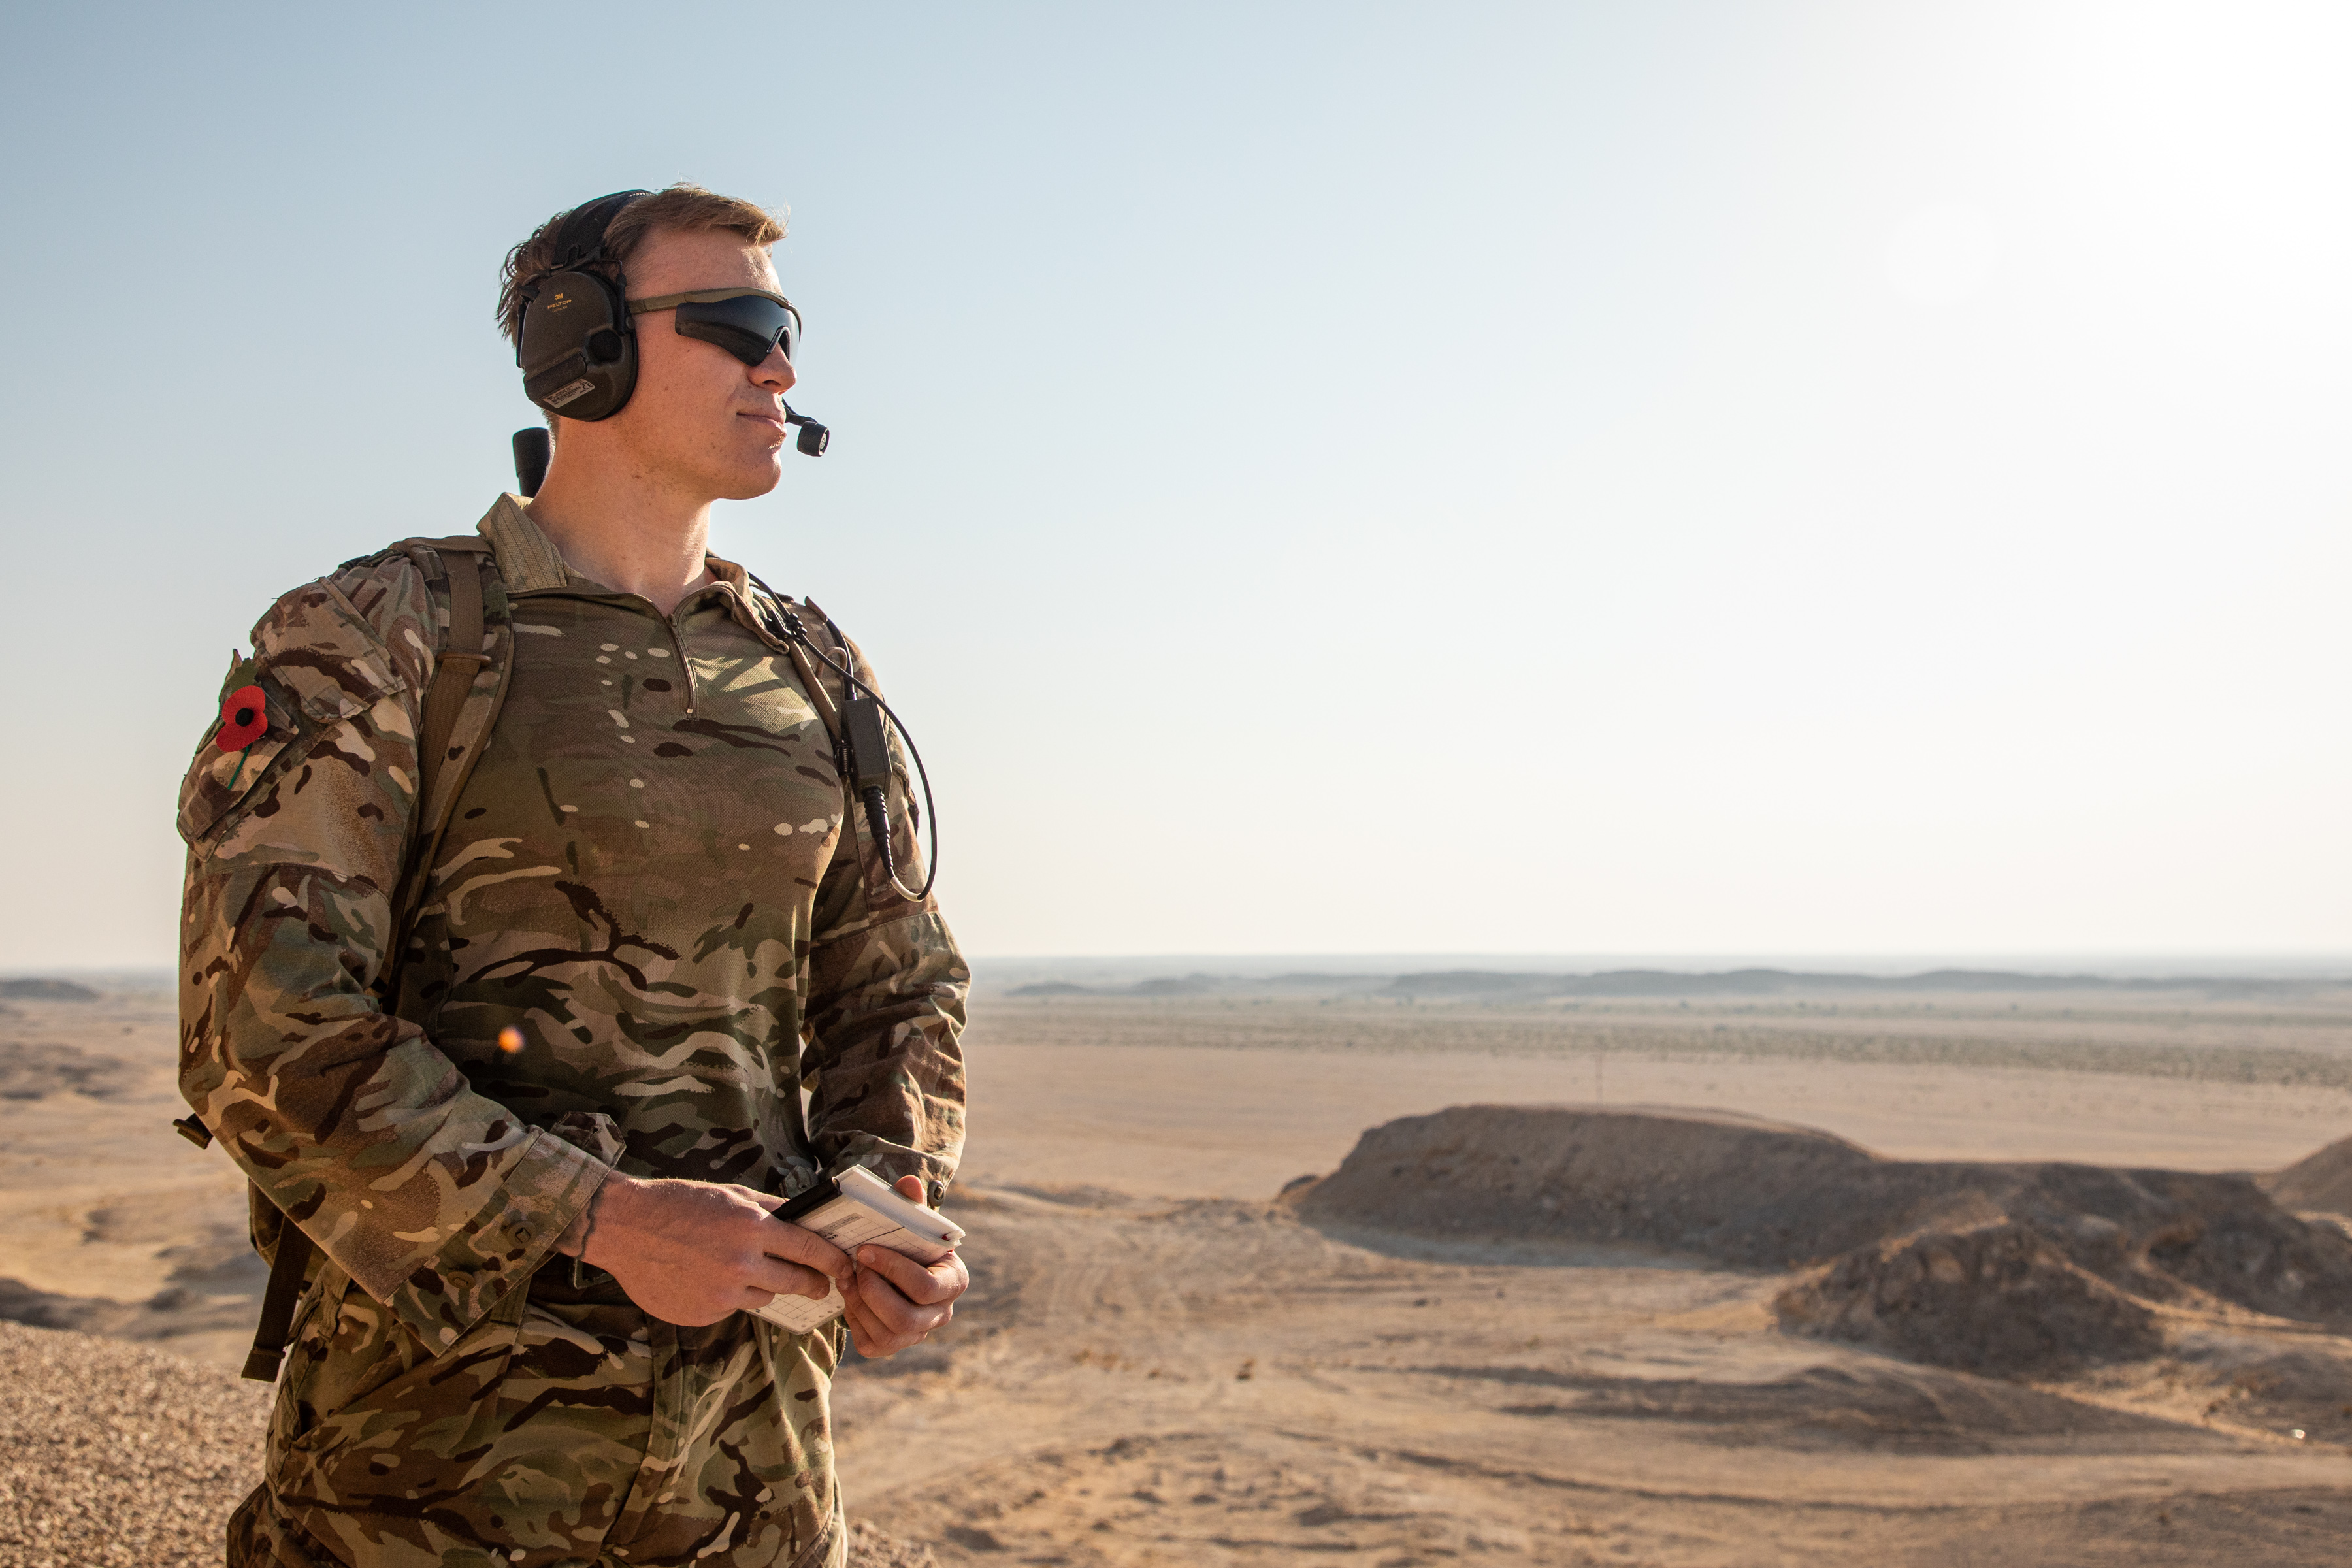 Personnel outside in Oman with head equipment on.